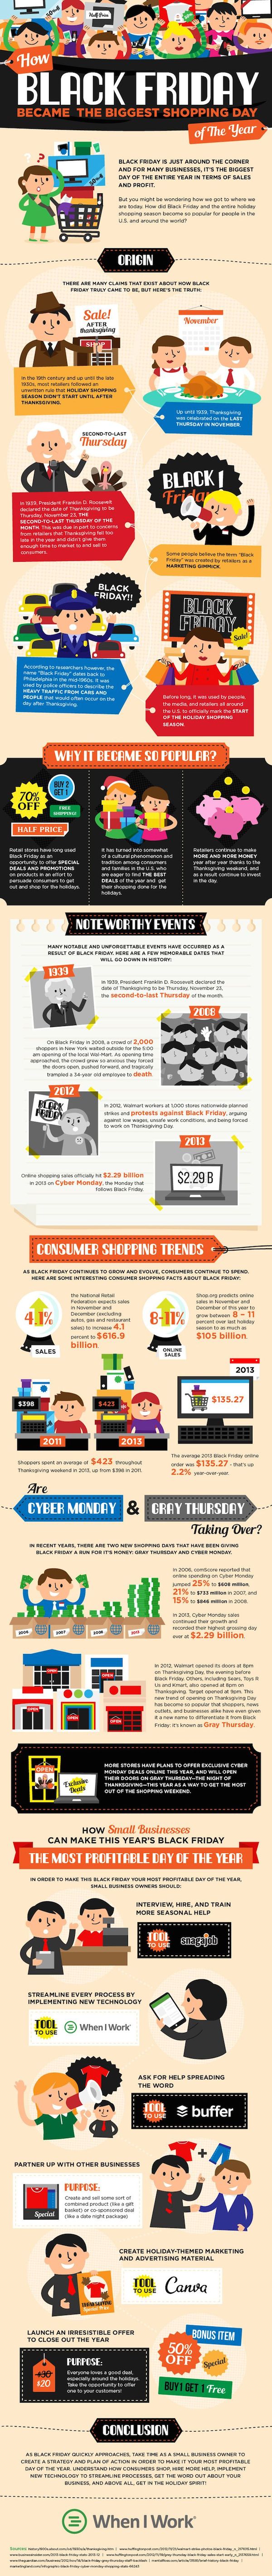 20 Black Friday And Cyber Monday Infographics image dd087341f4432fef10e8f187b6af5792.jpg